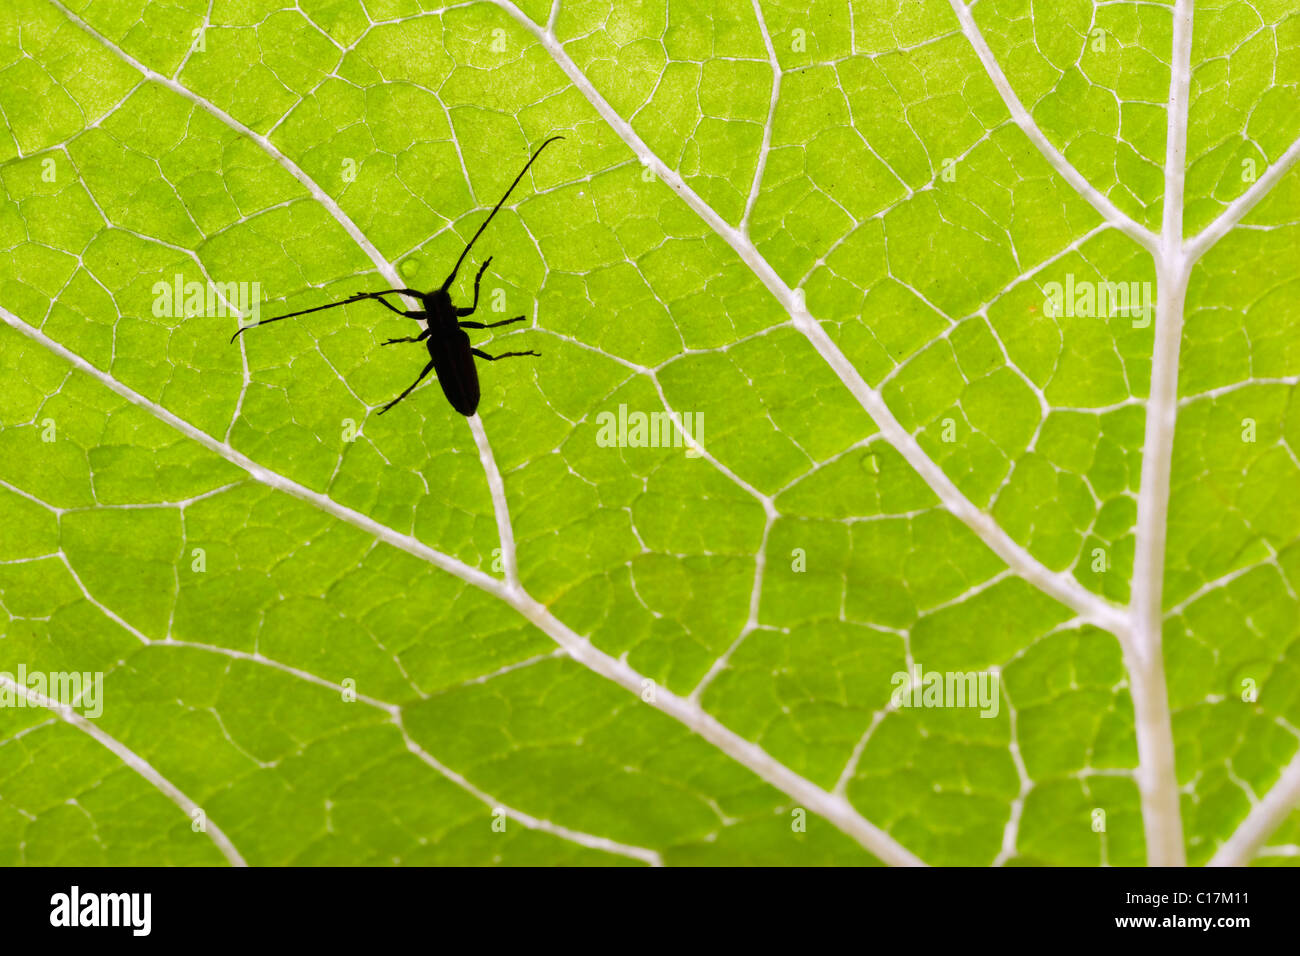 Silhouette of a longhorn beetle on a green leaf with nice veins and drops of water. Stock Photo